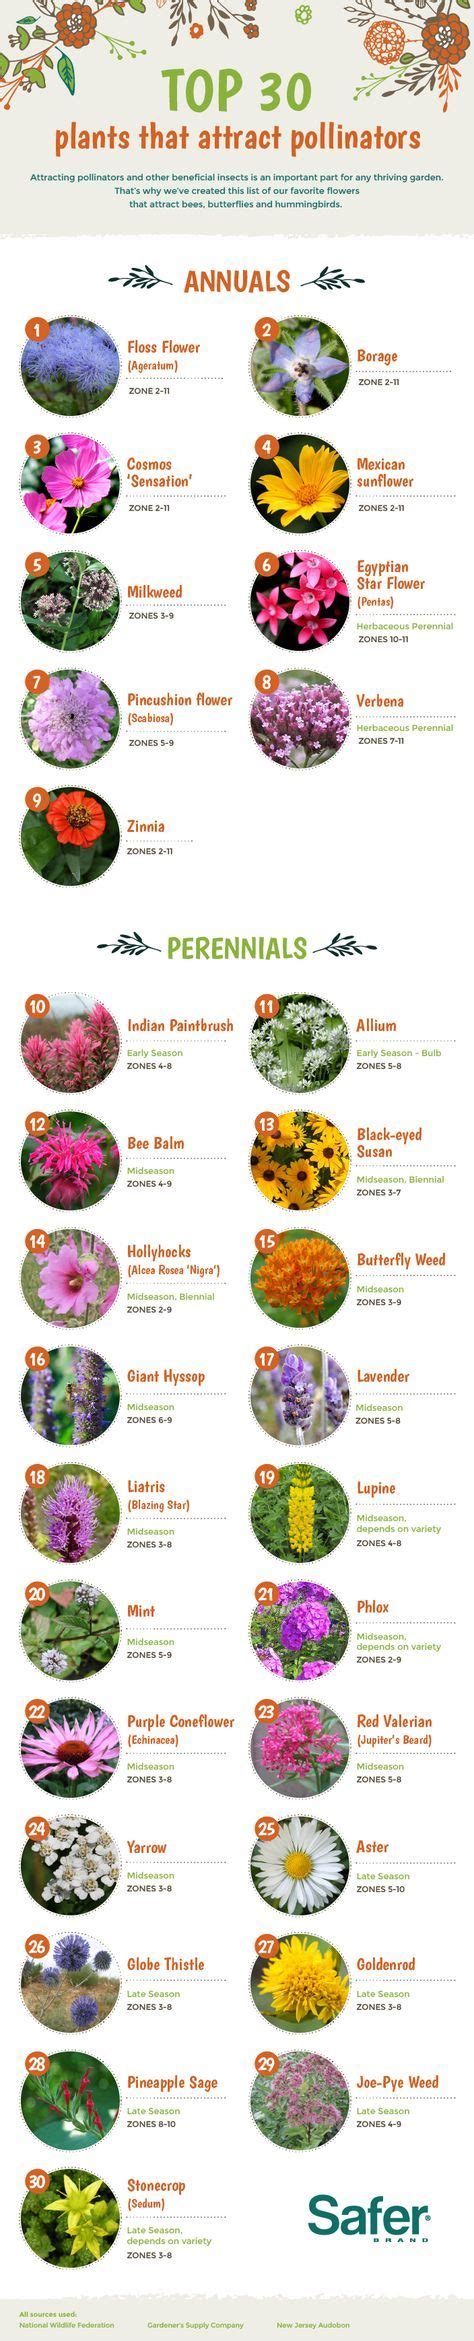 Every garden needs pollinators and bees are among the best. Top 30 Plants That Attract Pollinators | Pollinator plants ...